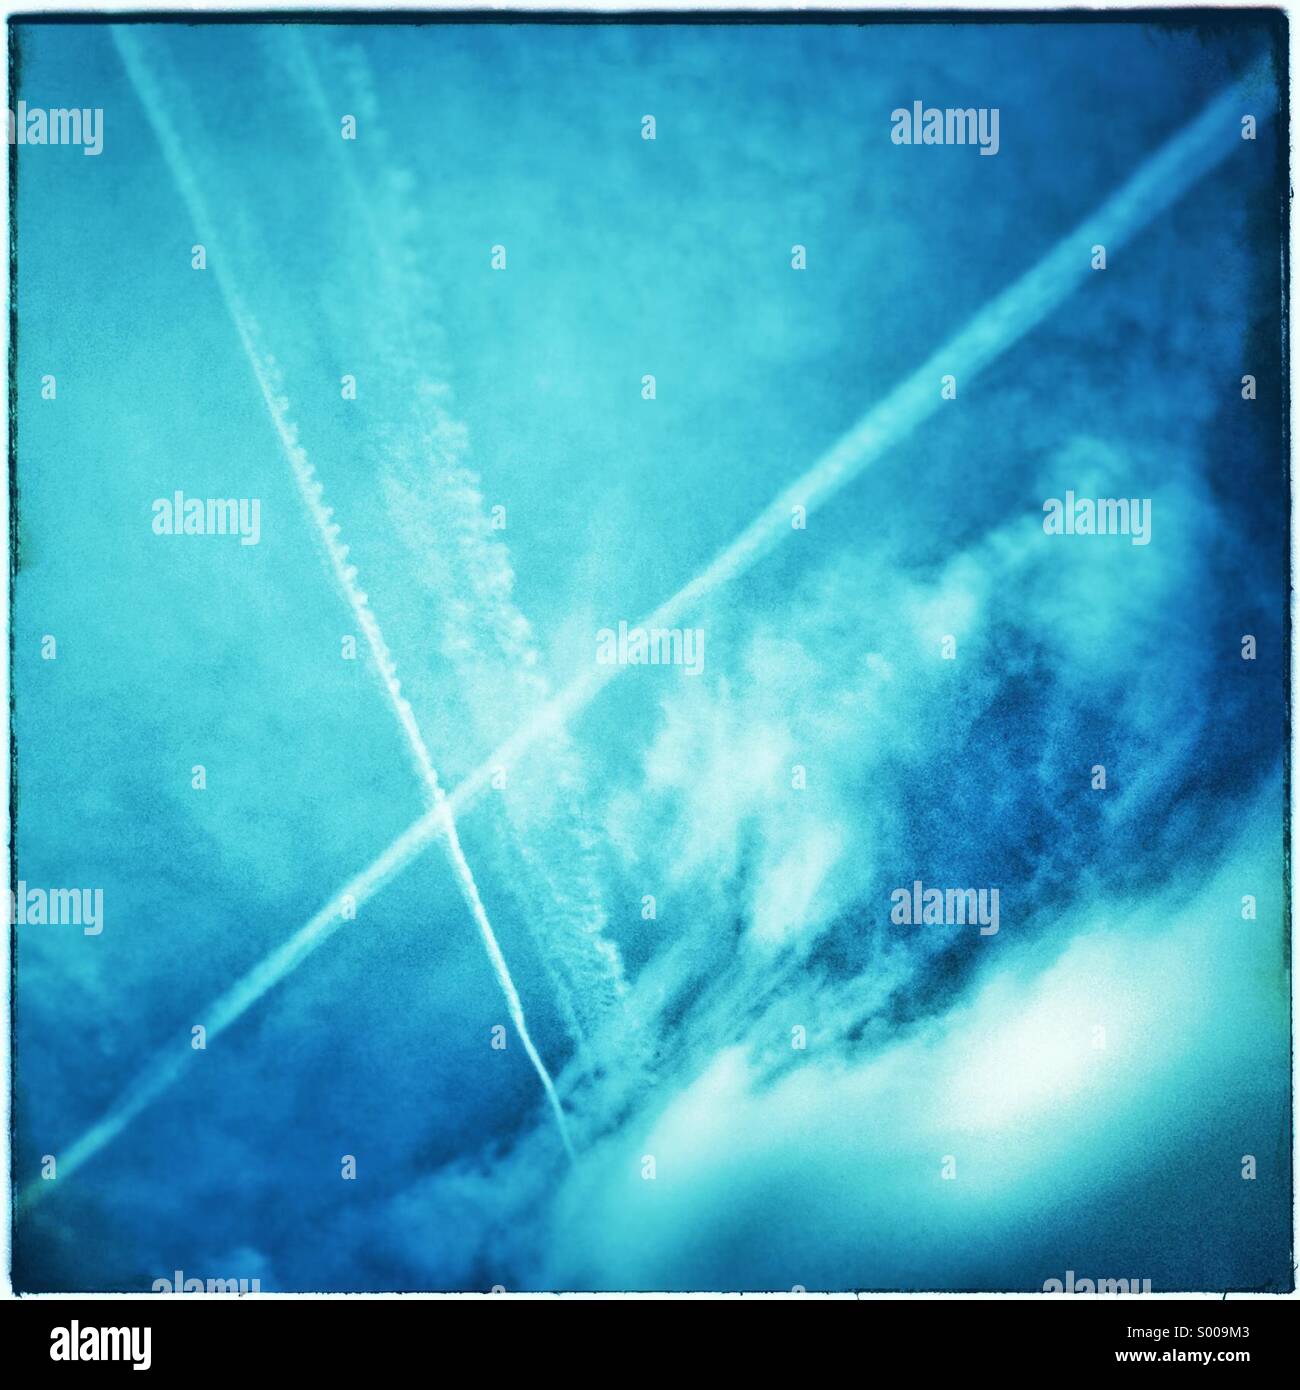 Cross sign airliner trails or condensed vapor track trails on blue sky, Barcelona, Catalonia, Spain Stock Photo